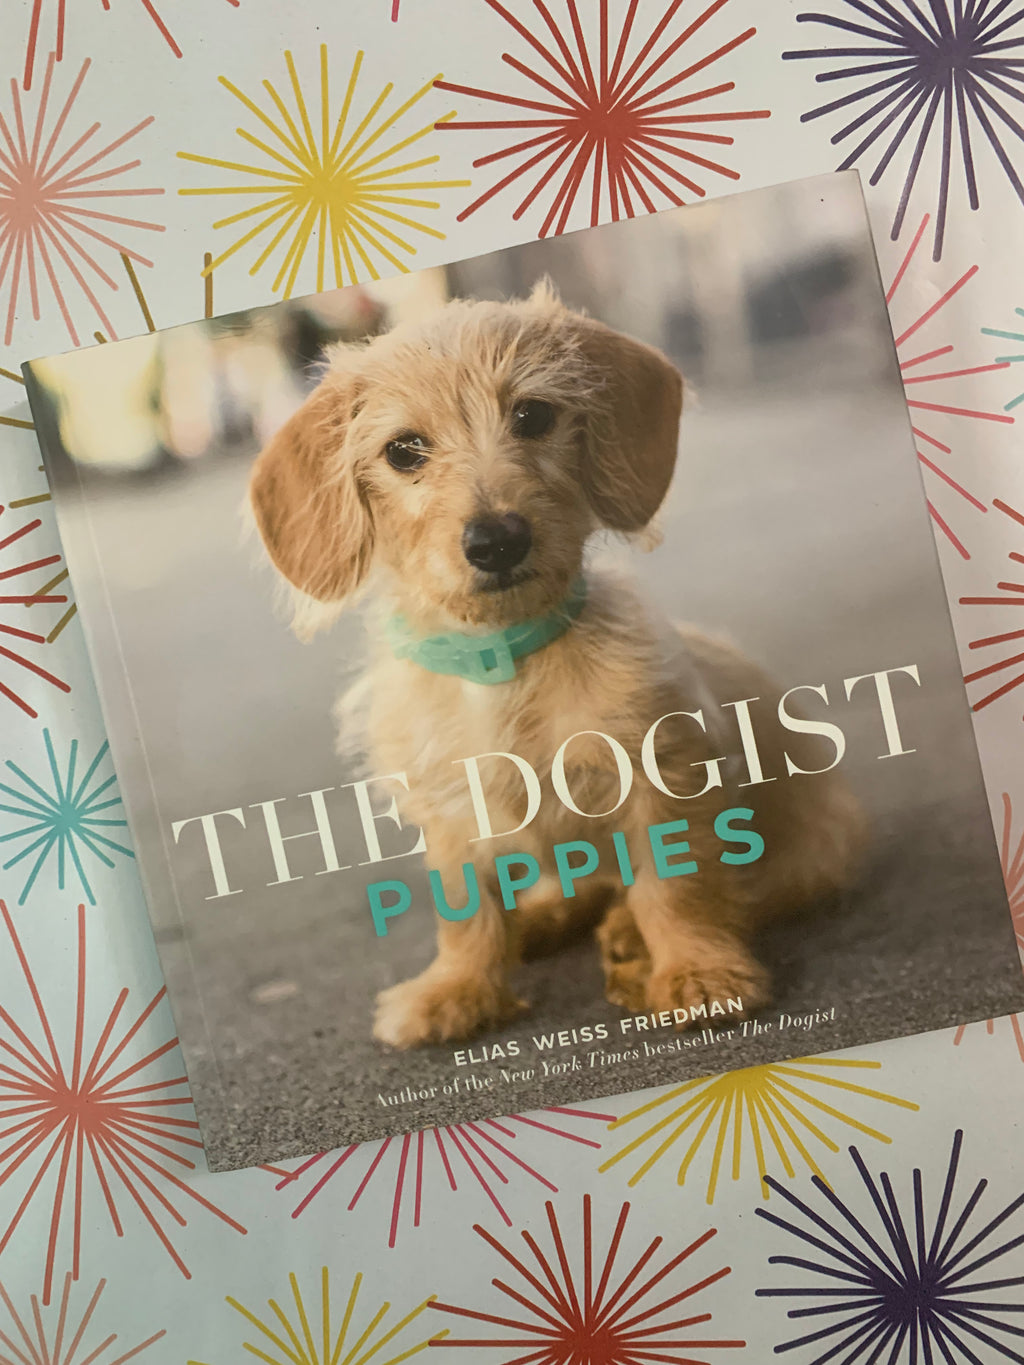 The Dogist: Puppies- By Elias Weiss Friedman